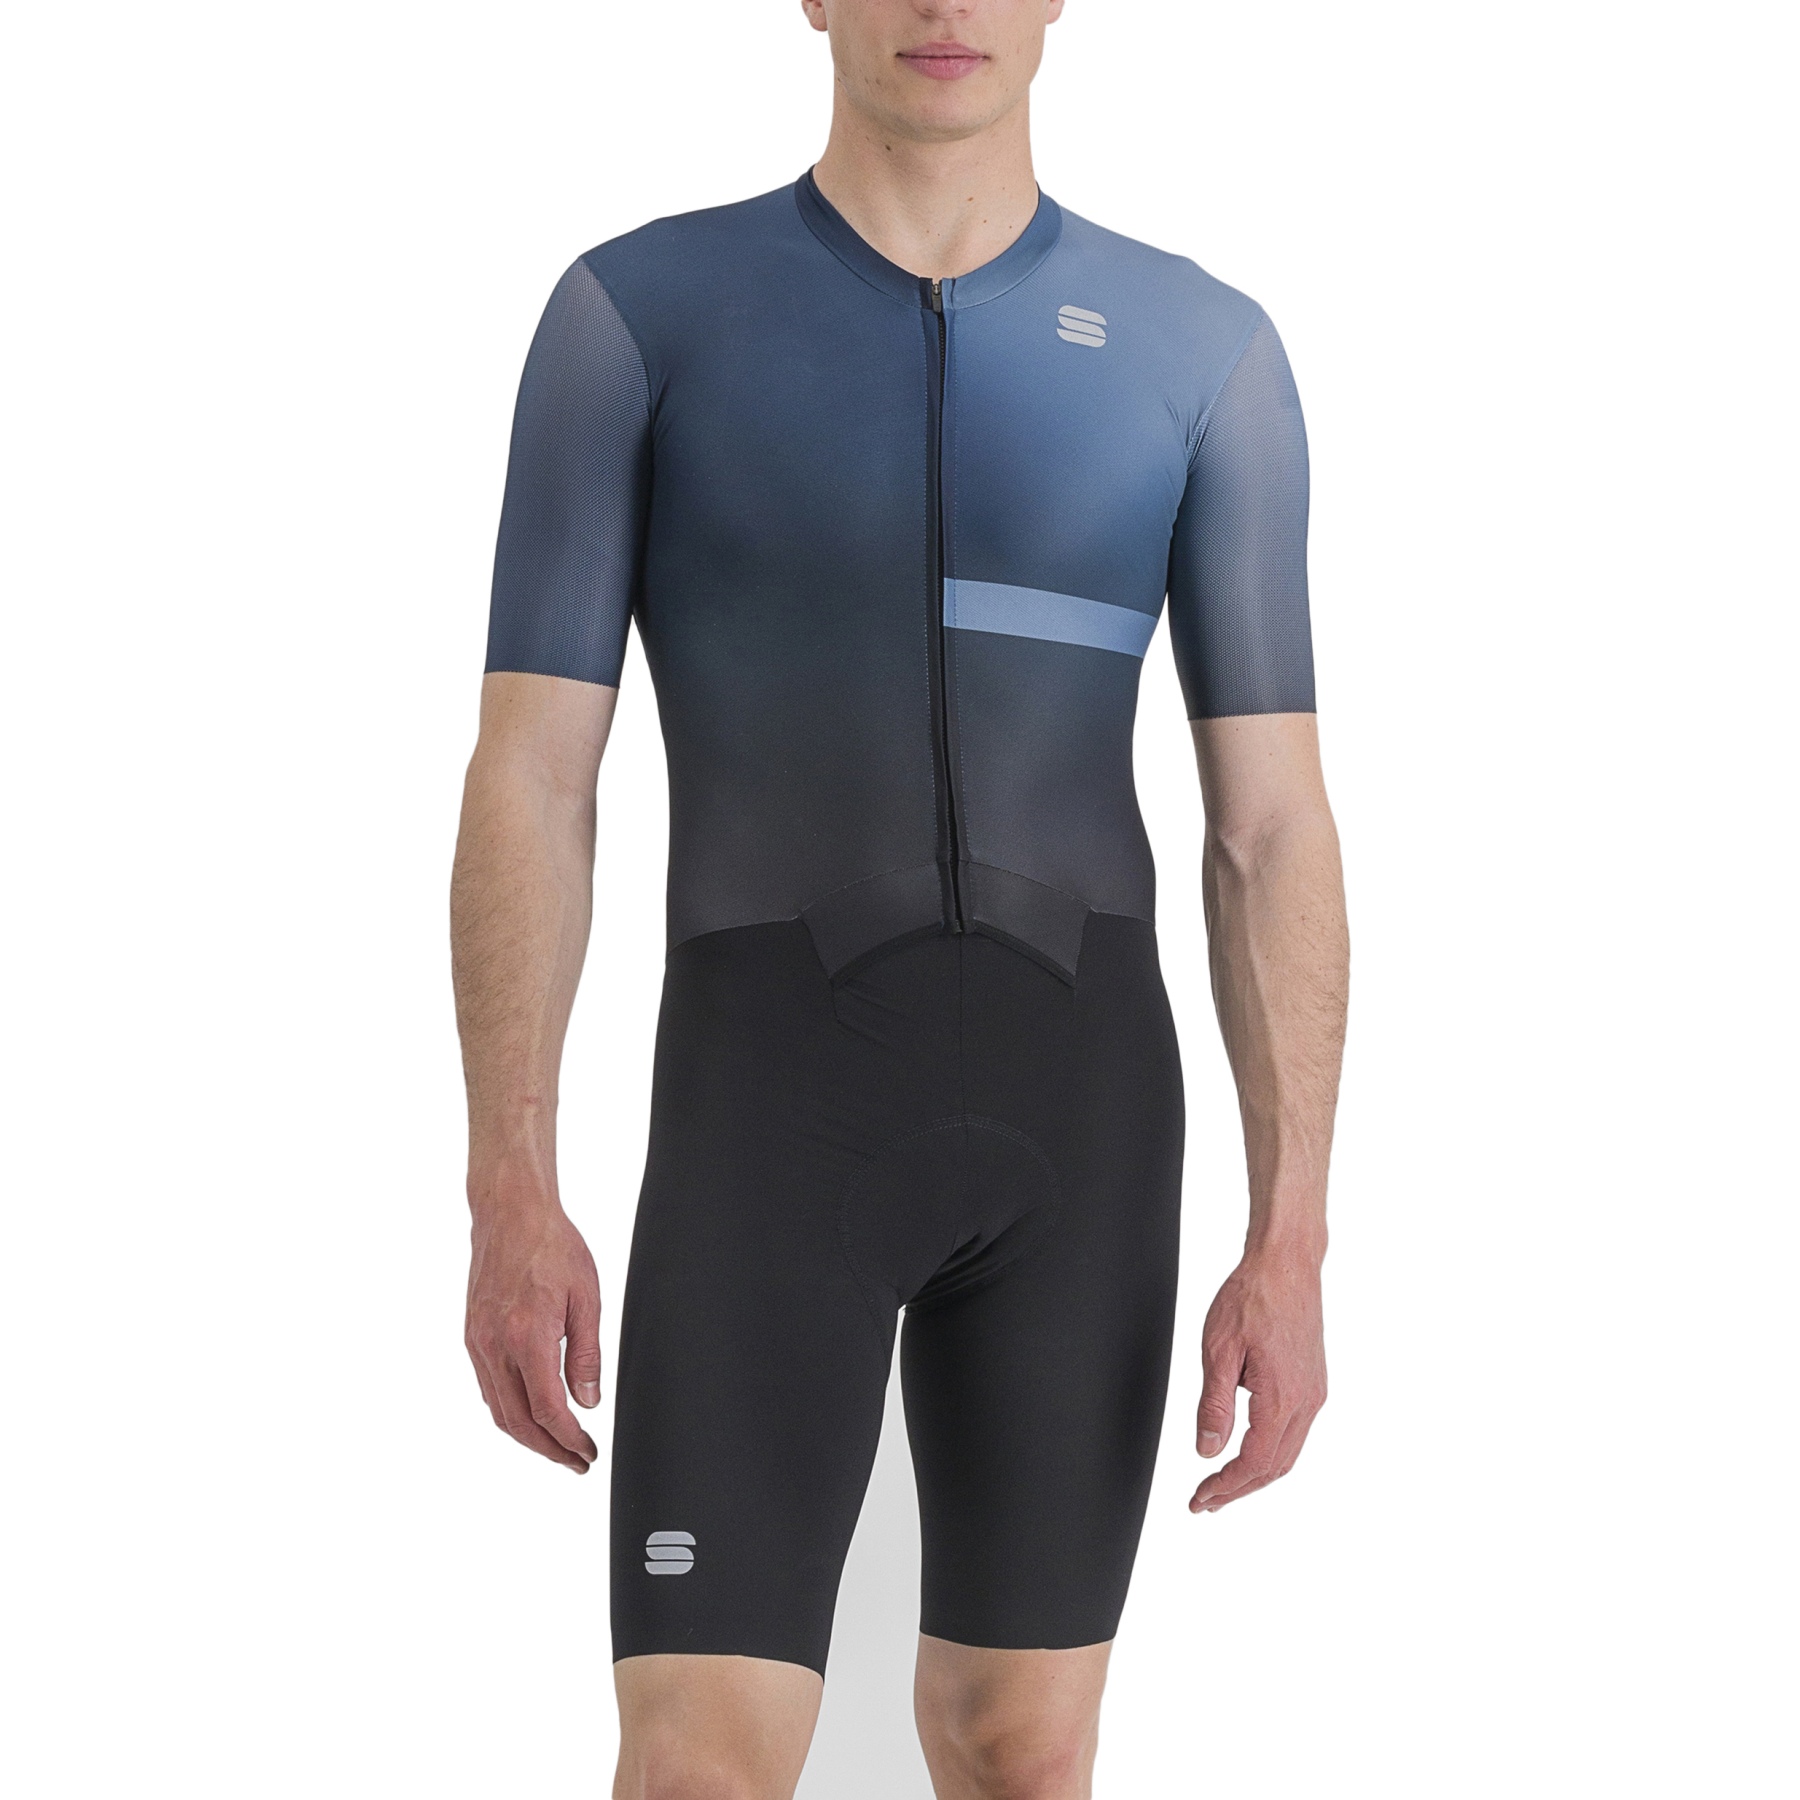 Picture of Sportful Bomber Race Suit - 002 Black/Galaxy Blue